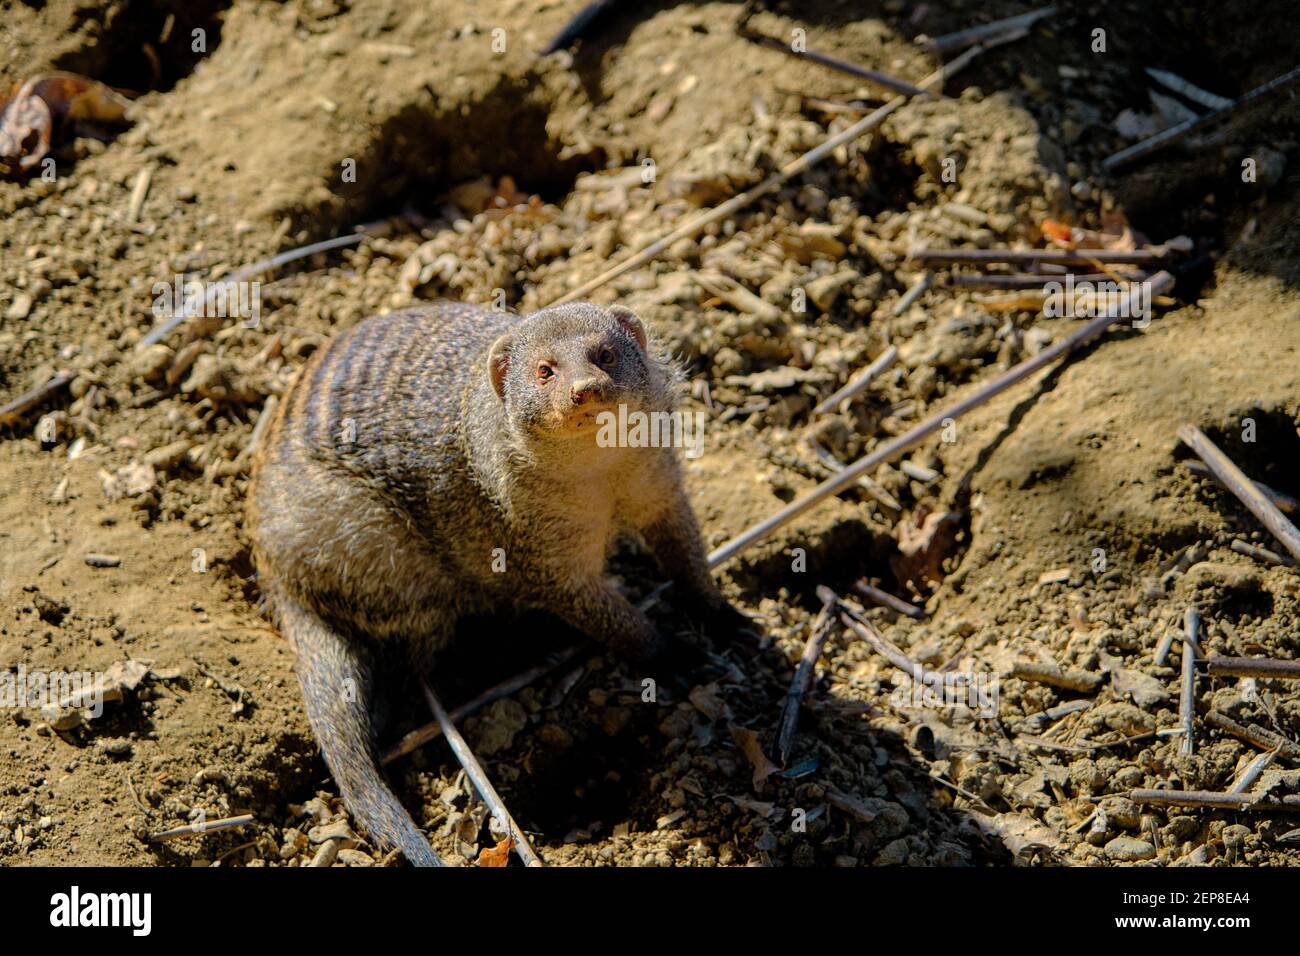 Banded mongooses in zoo during sunny day. Animals looks like big mouse and  rat standing on soil Stock Photo - Alamy